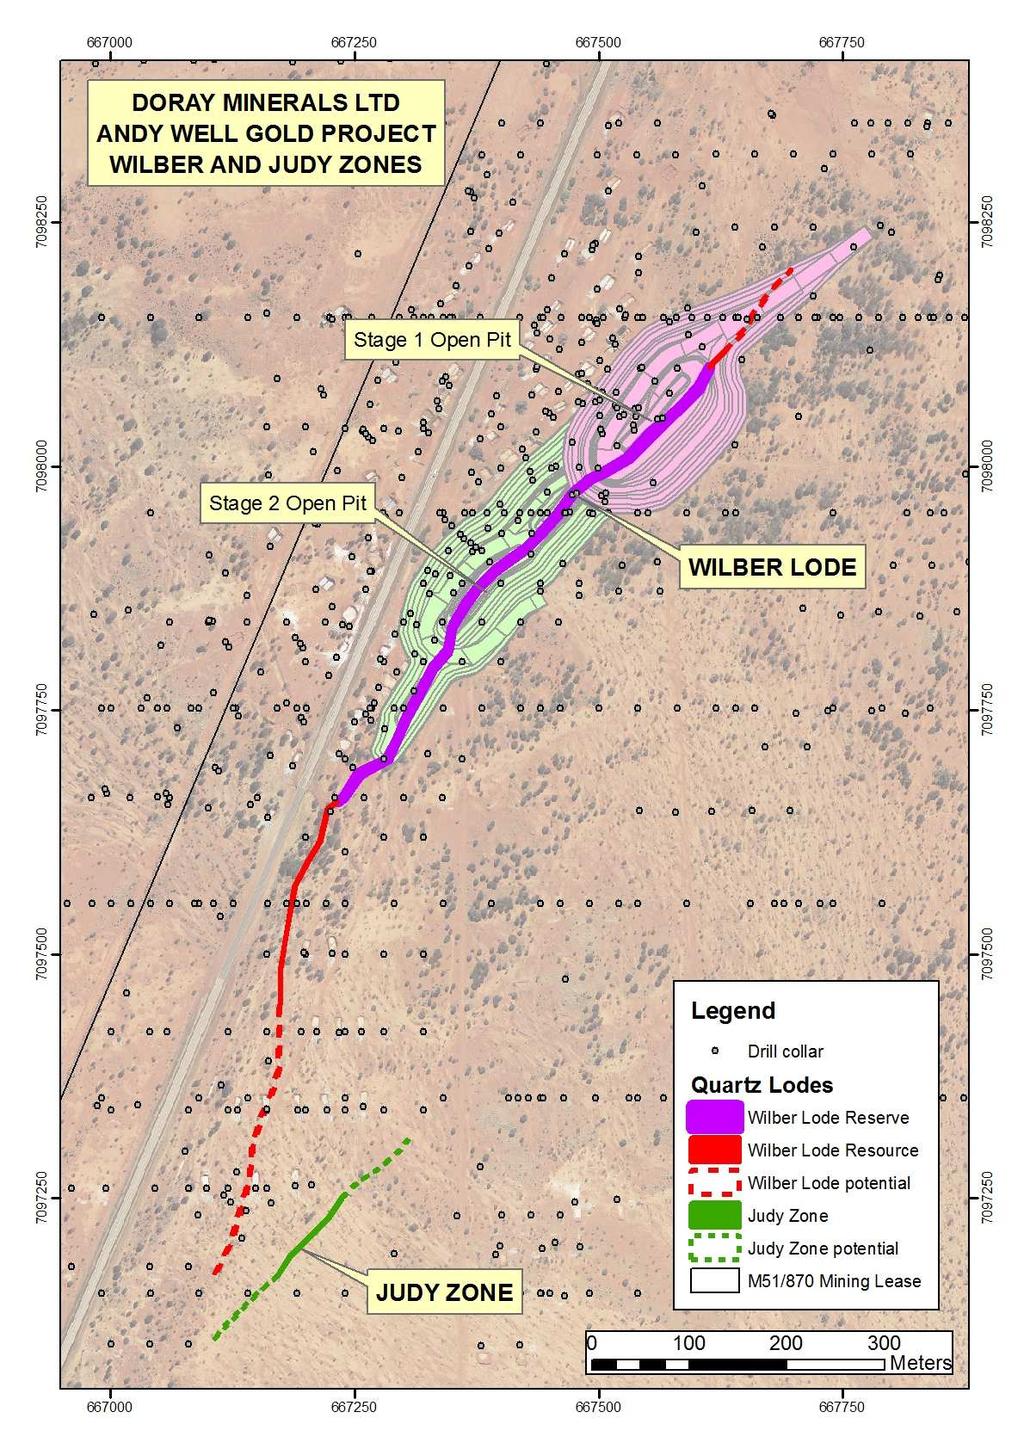 Andy Well Significant upside potential Previous drilling shallow (<100m) and wide spaced Numerous additional targets Potential